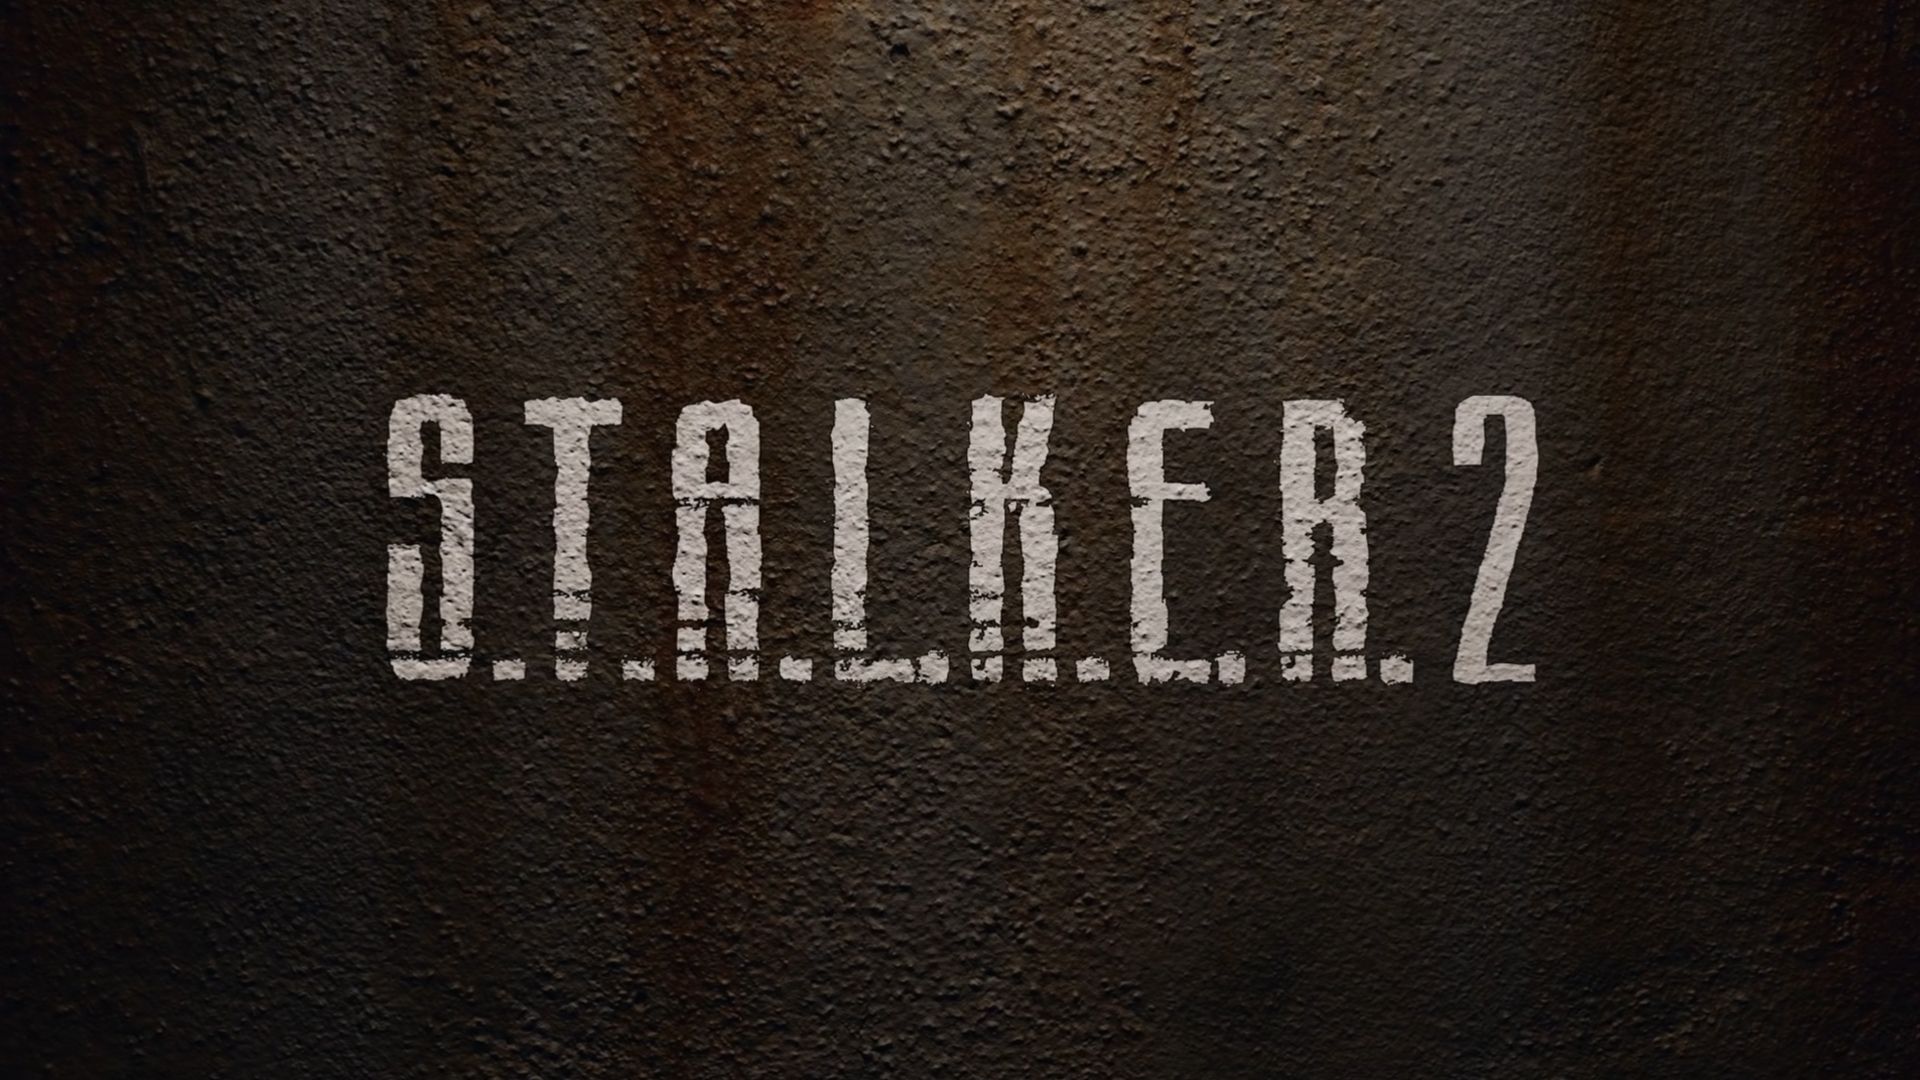 STALKER 2 gameplay teaser and new information revealed by GSC Game